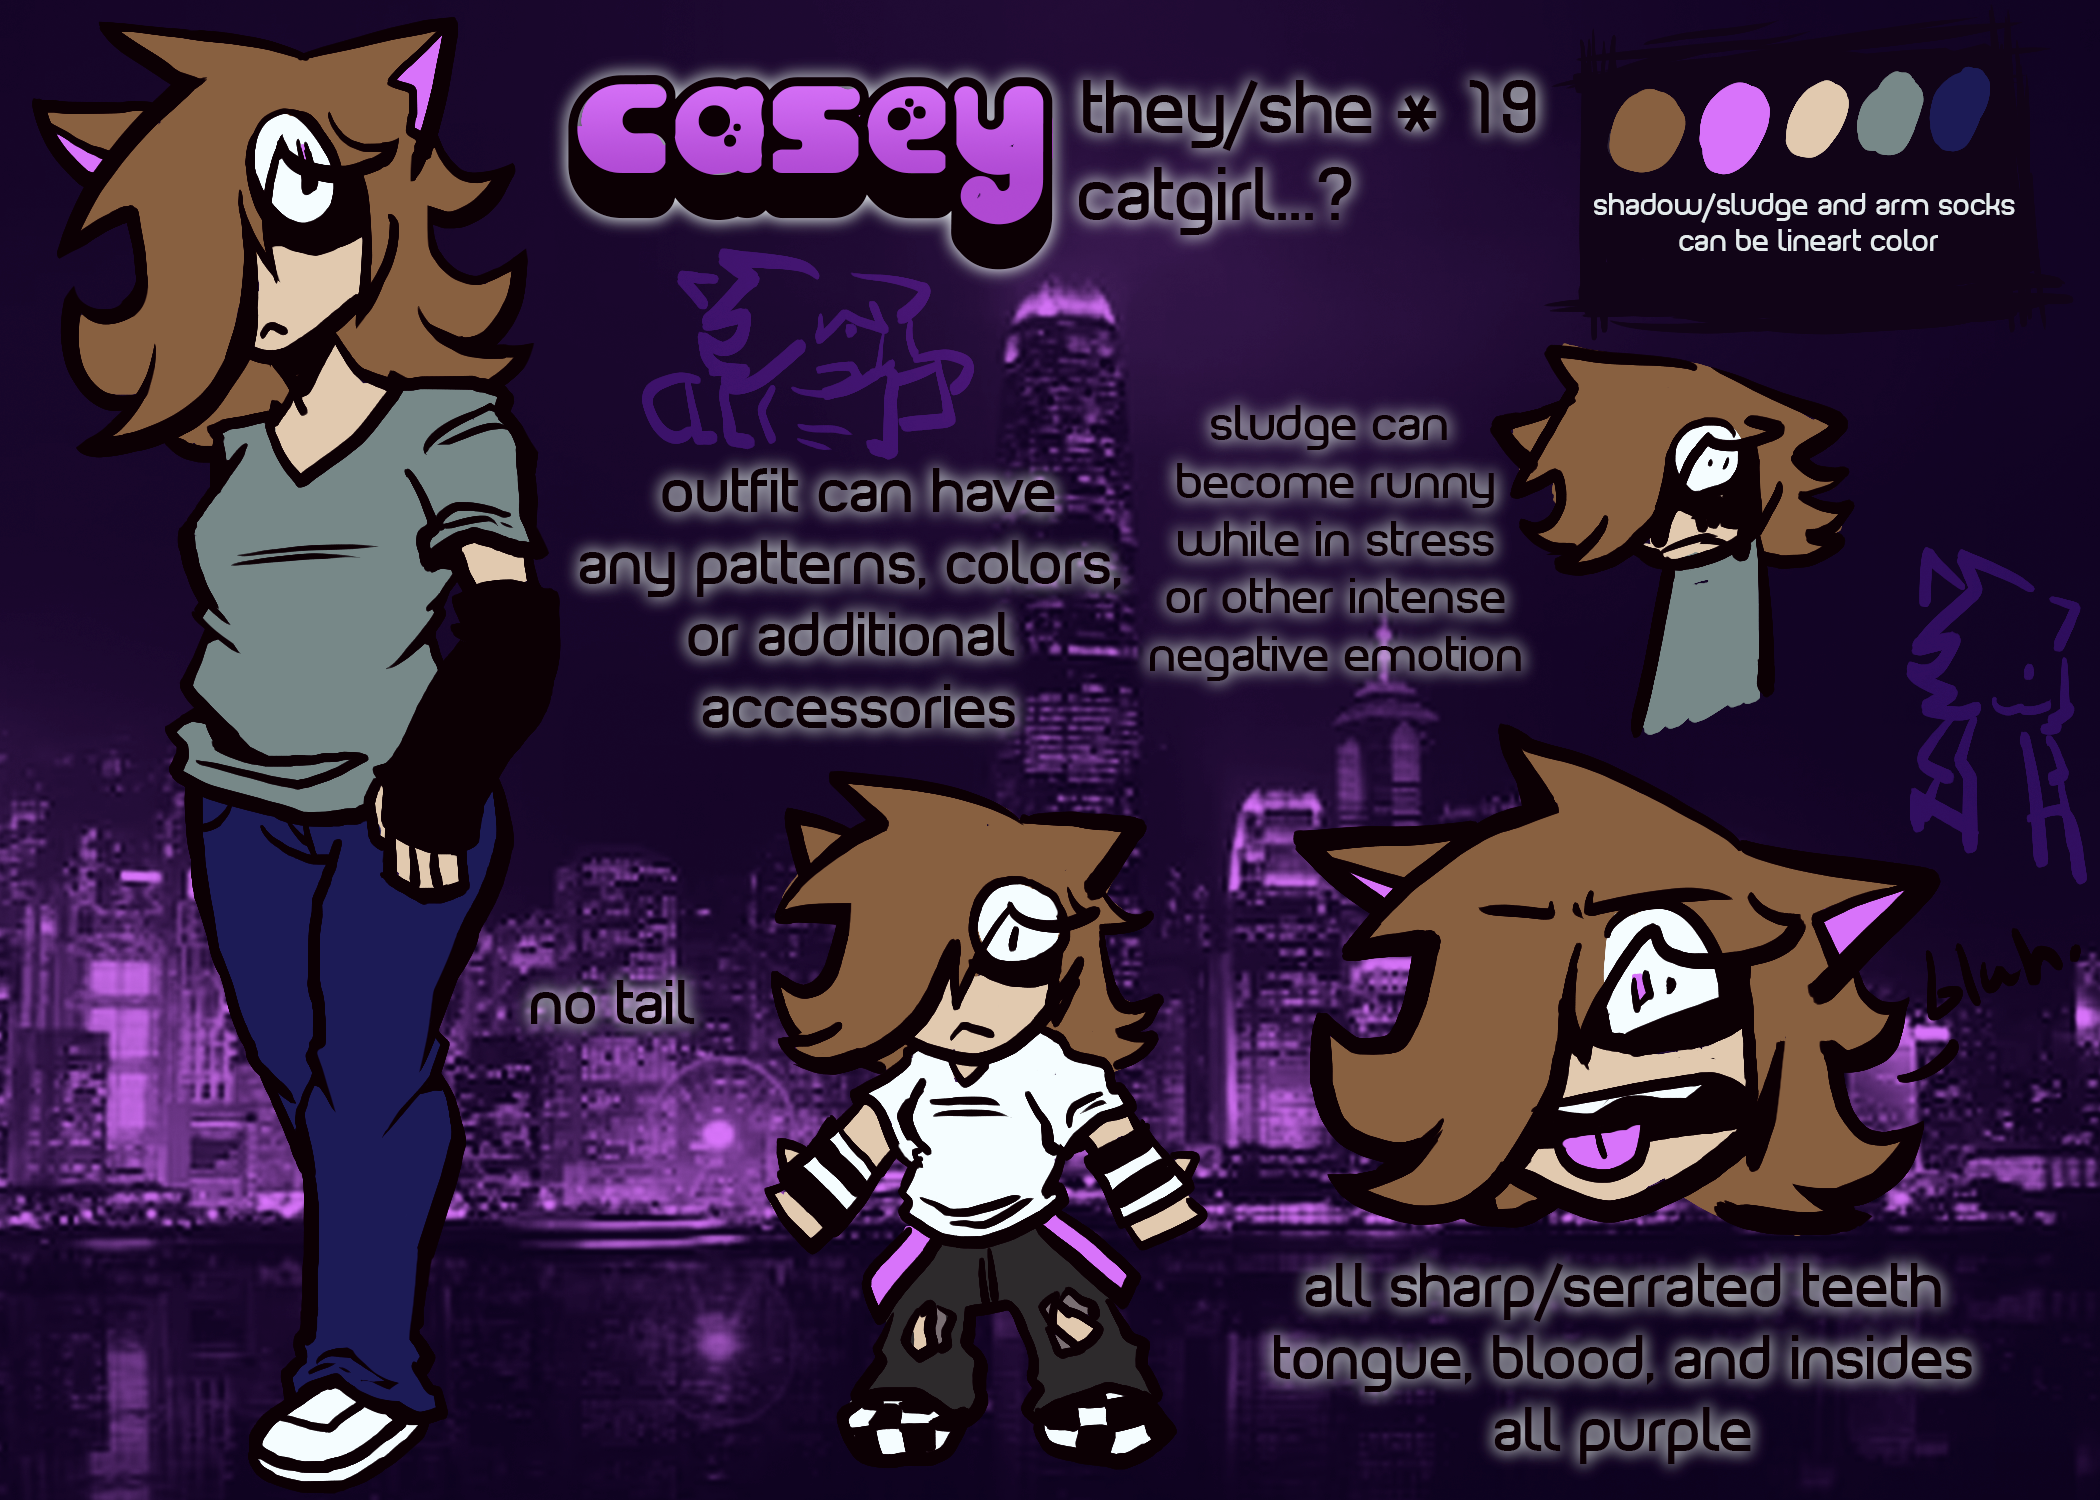 ref of my sona standing in front of a purple city background. text on sheet reads as follows:
    casey * they/she * 19 * catgirl,,,? 
    no tail
    outfit can have any patterns, colors, or accessories
    sludge around top half of face (under hairline, ends just below eyes) can become runny while in stress or other intense negative emotions
    all sharp/serrated teeth
    tongue, blood, and insides all purple